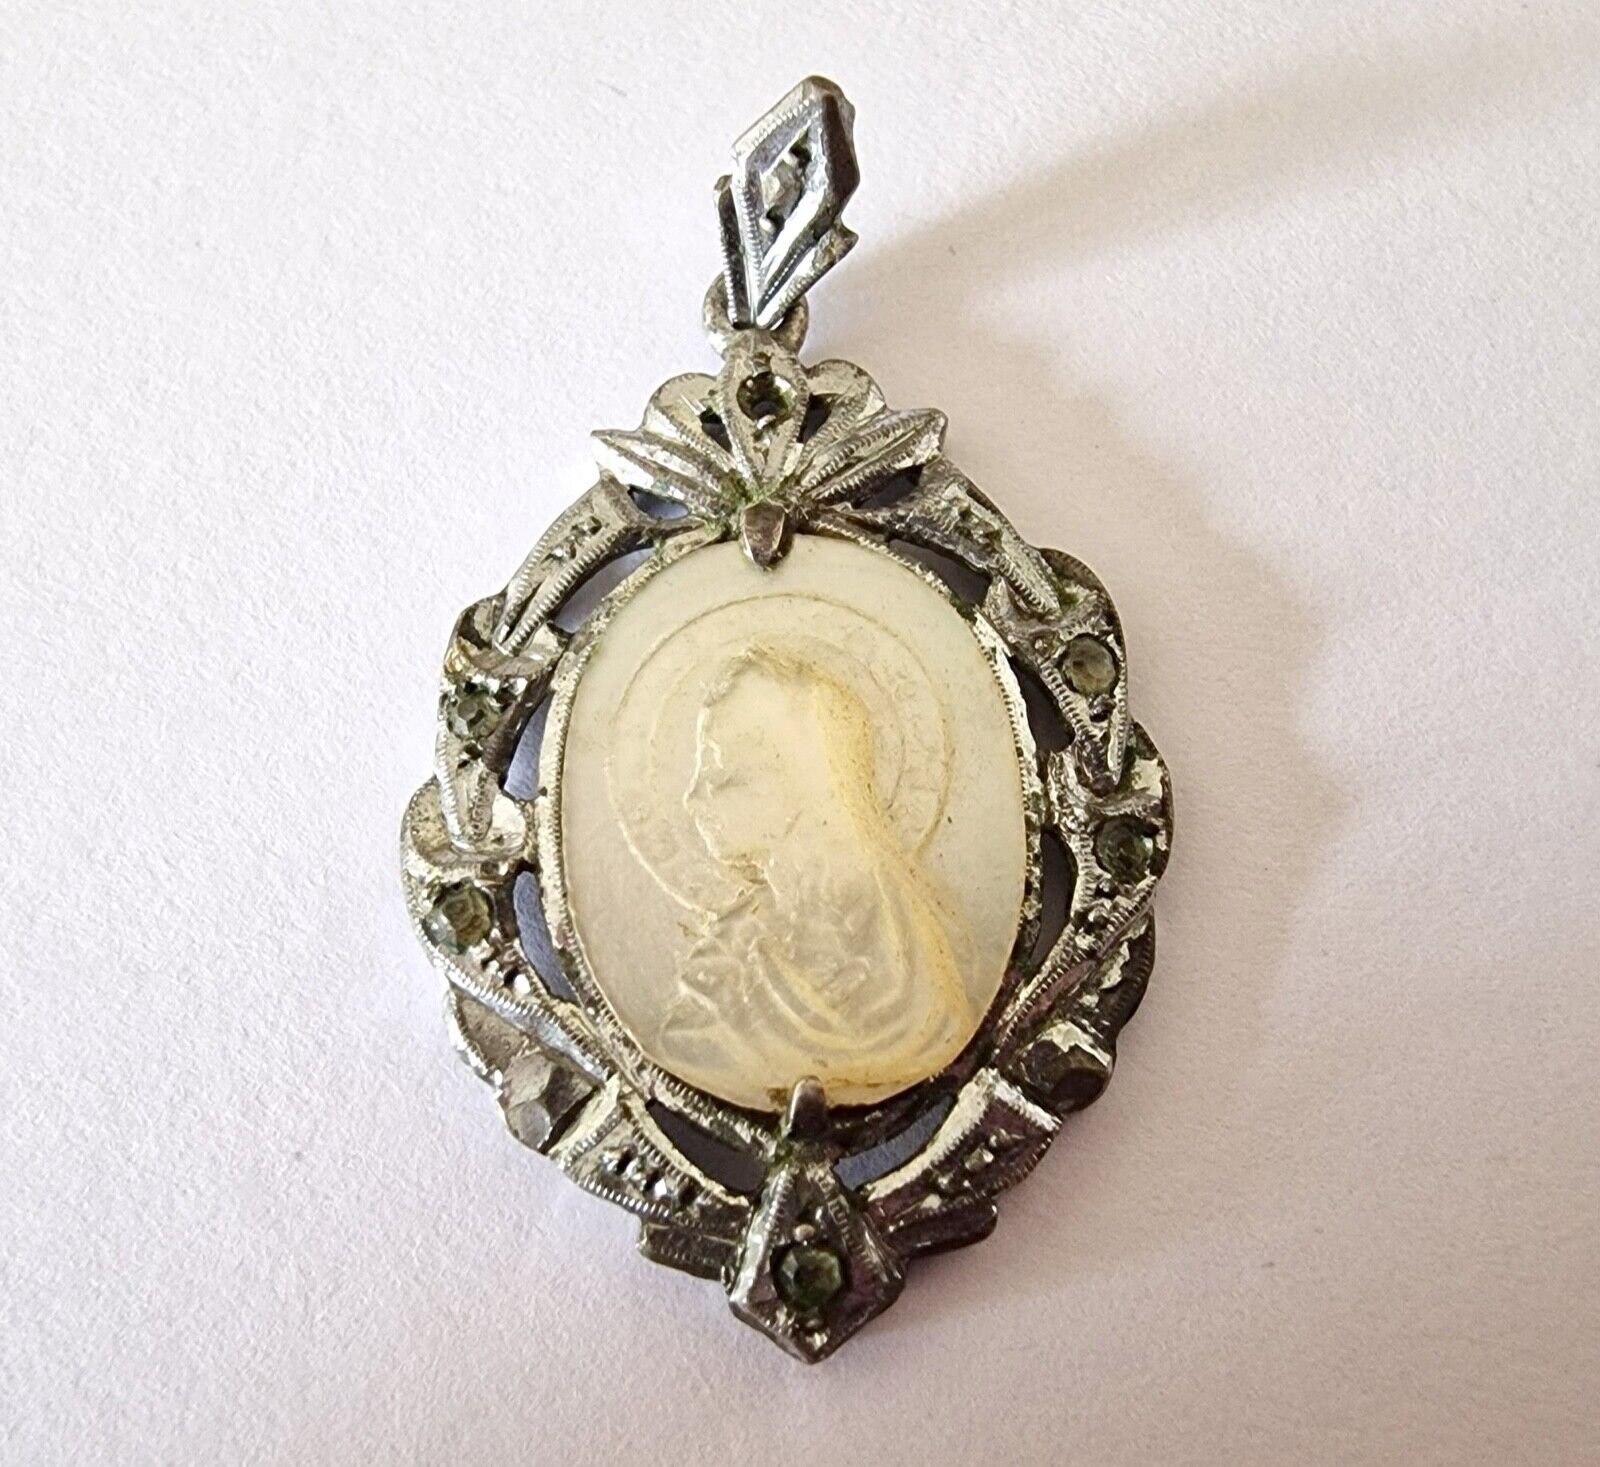 ANTIQUE VIRGIN PRAYING MEDAL. SILVER, MOP AND CRYSTAL. SPAIN, 20s